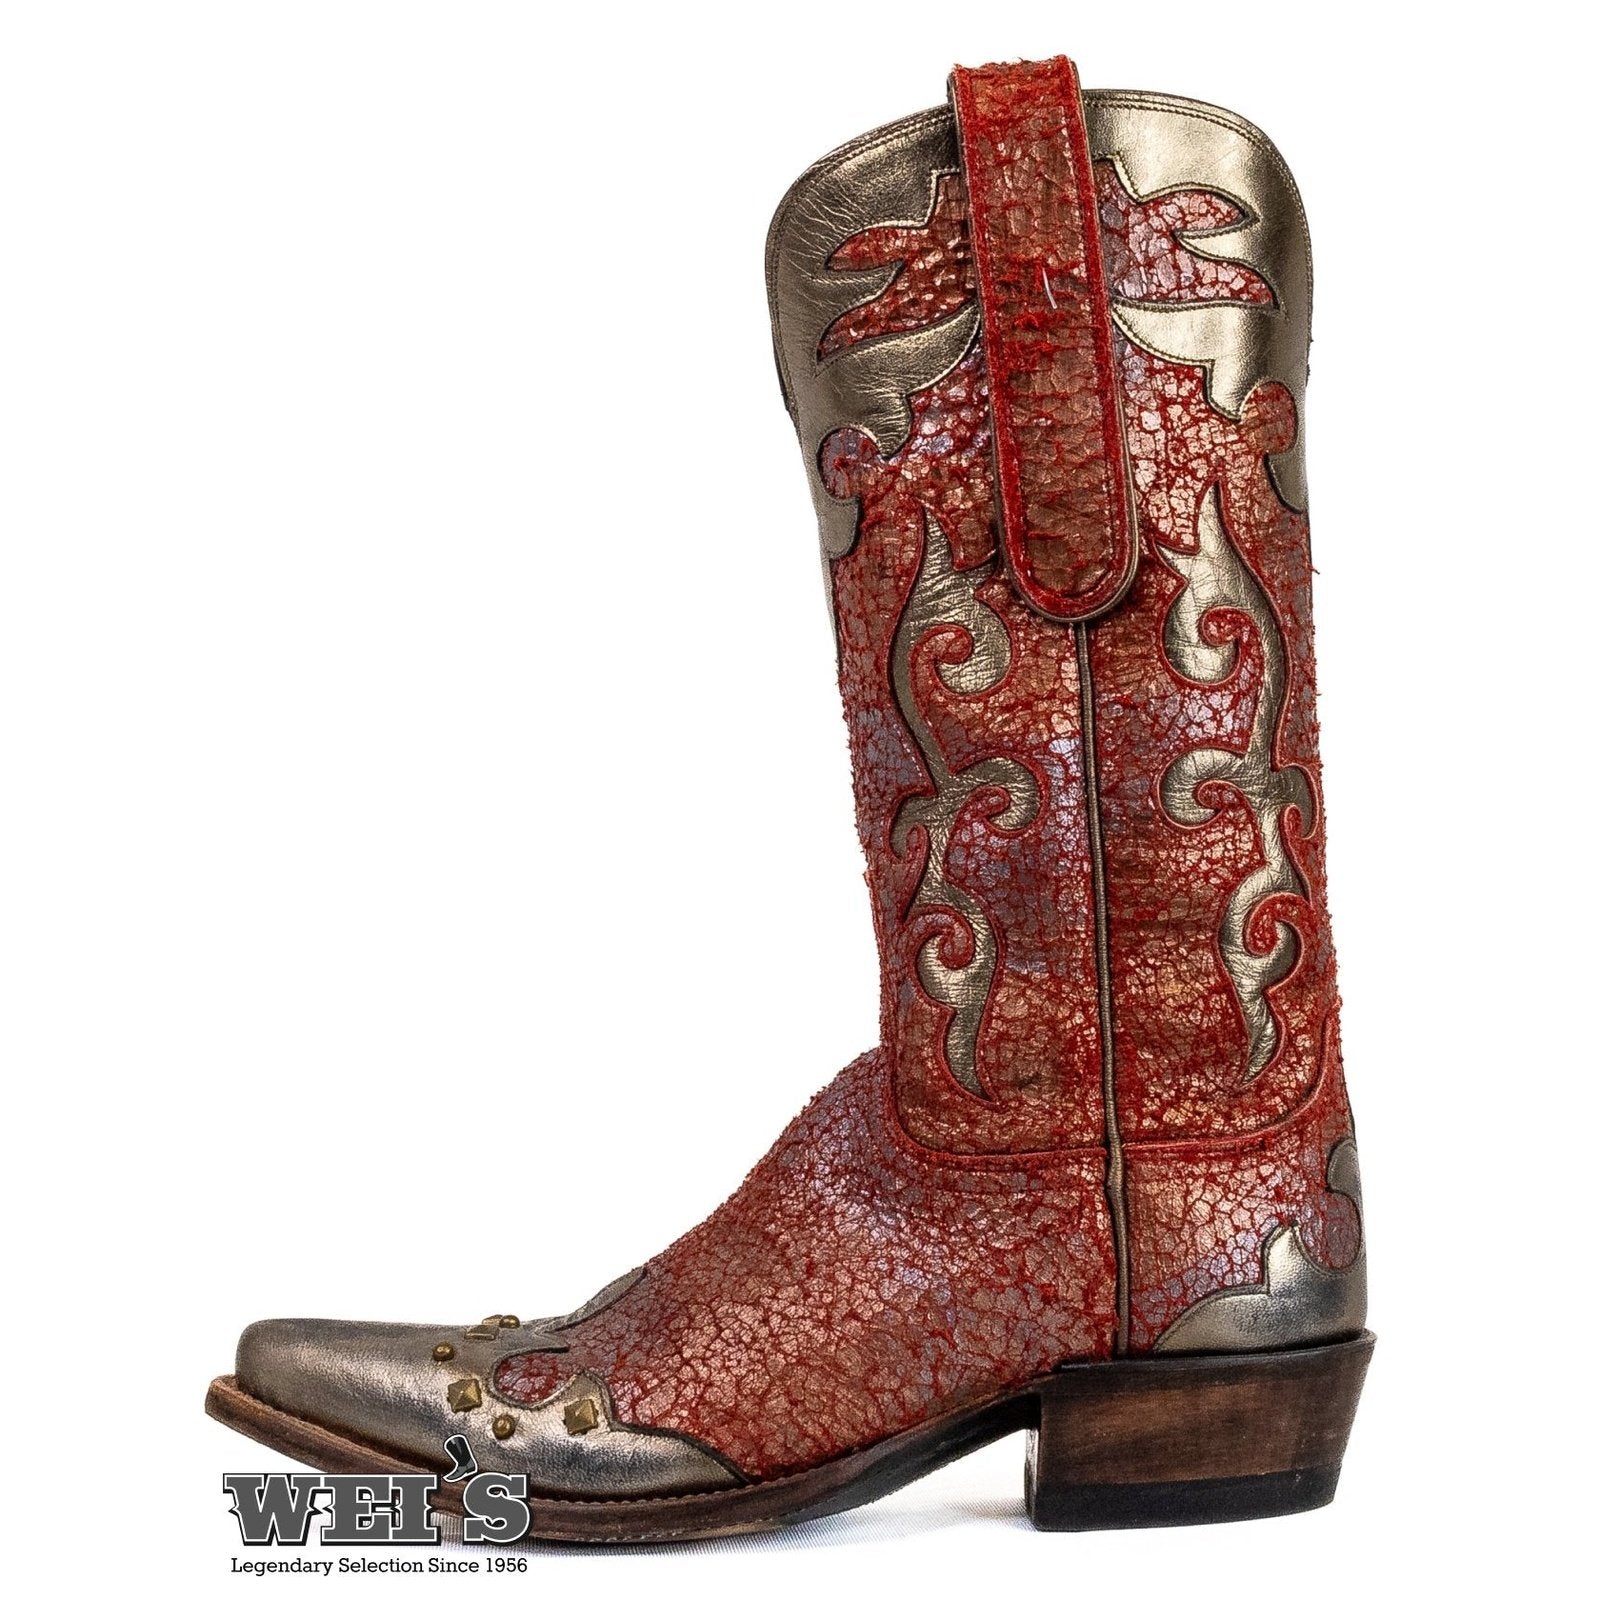 Lucchese Women's Diva Boots DV0013 Clearance - Clearance